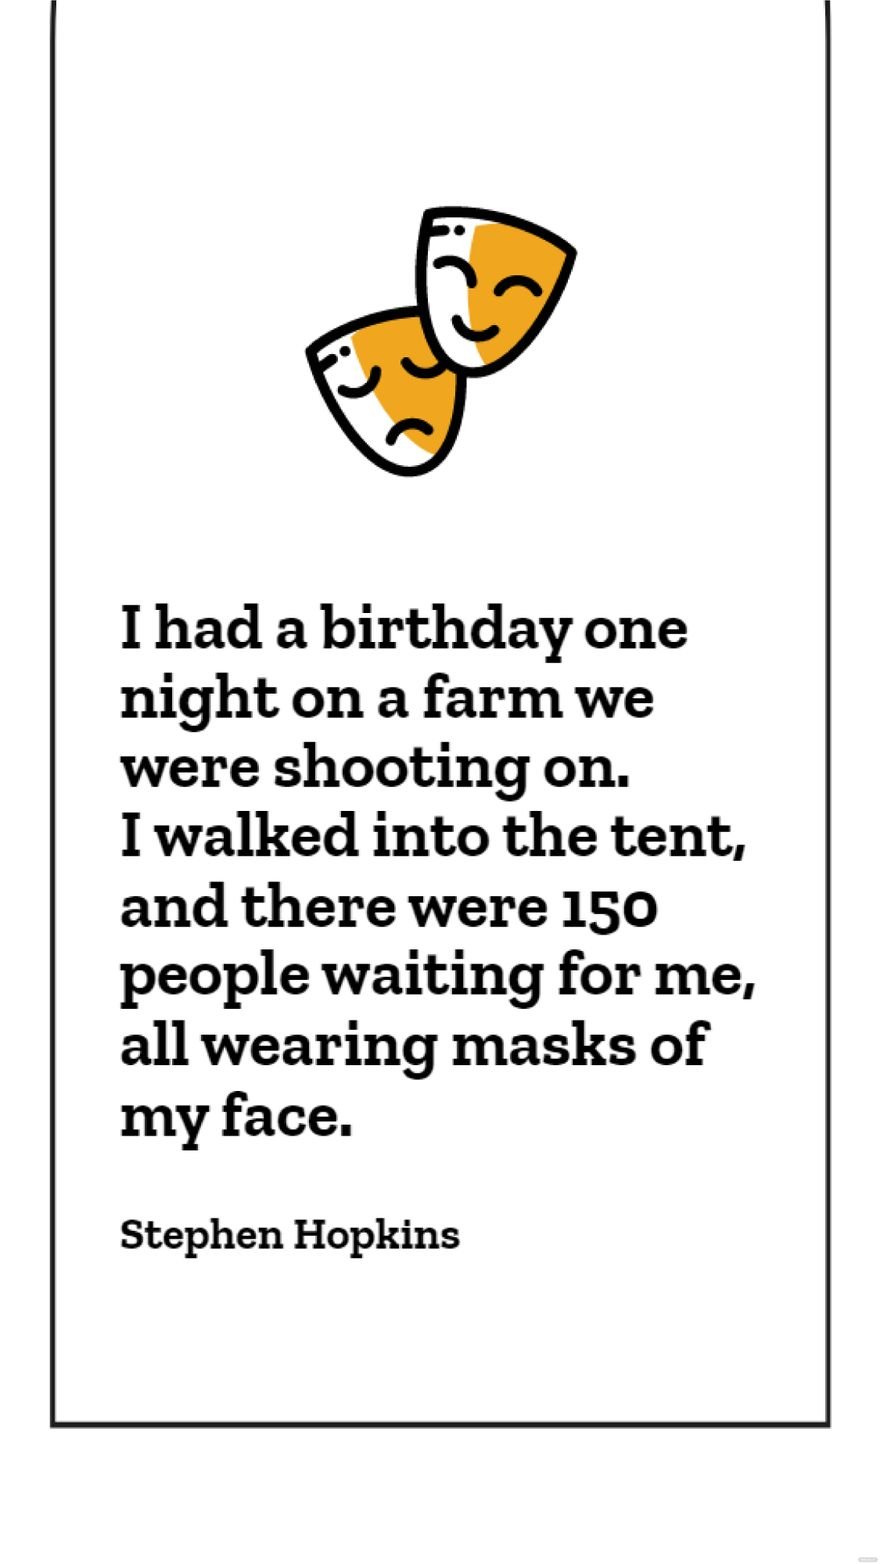 Stephen Hopkins - I had a birthday one night on a farm we were shooting on. I walked into the tent, and there were 150 people waiting for me, all wearing masks of my face.